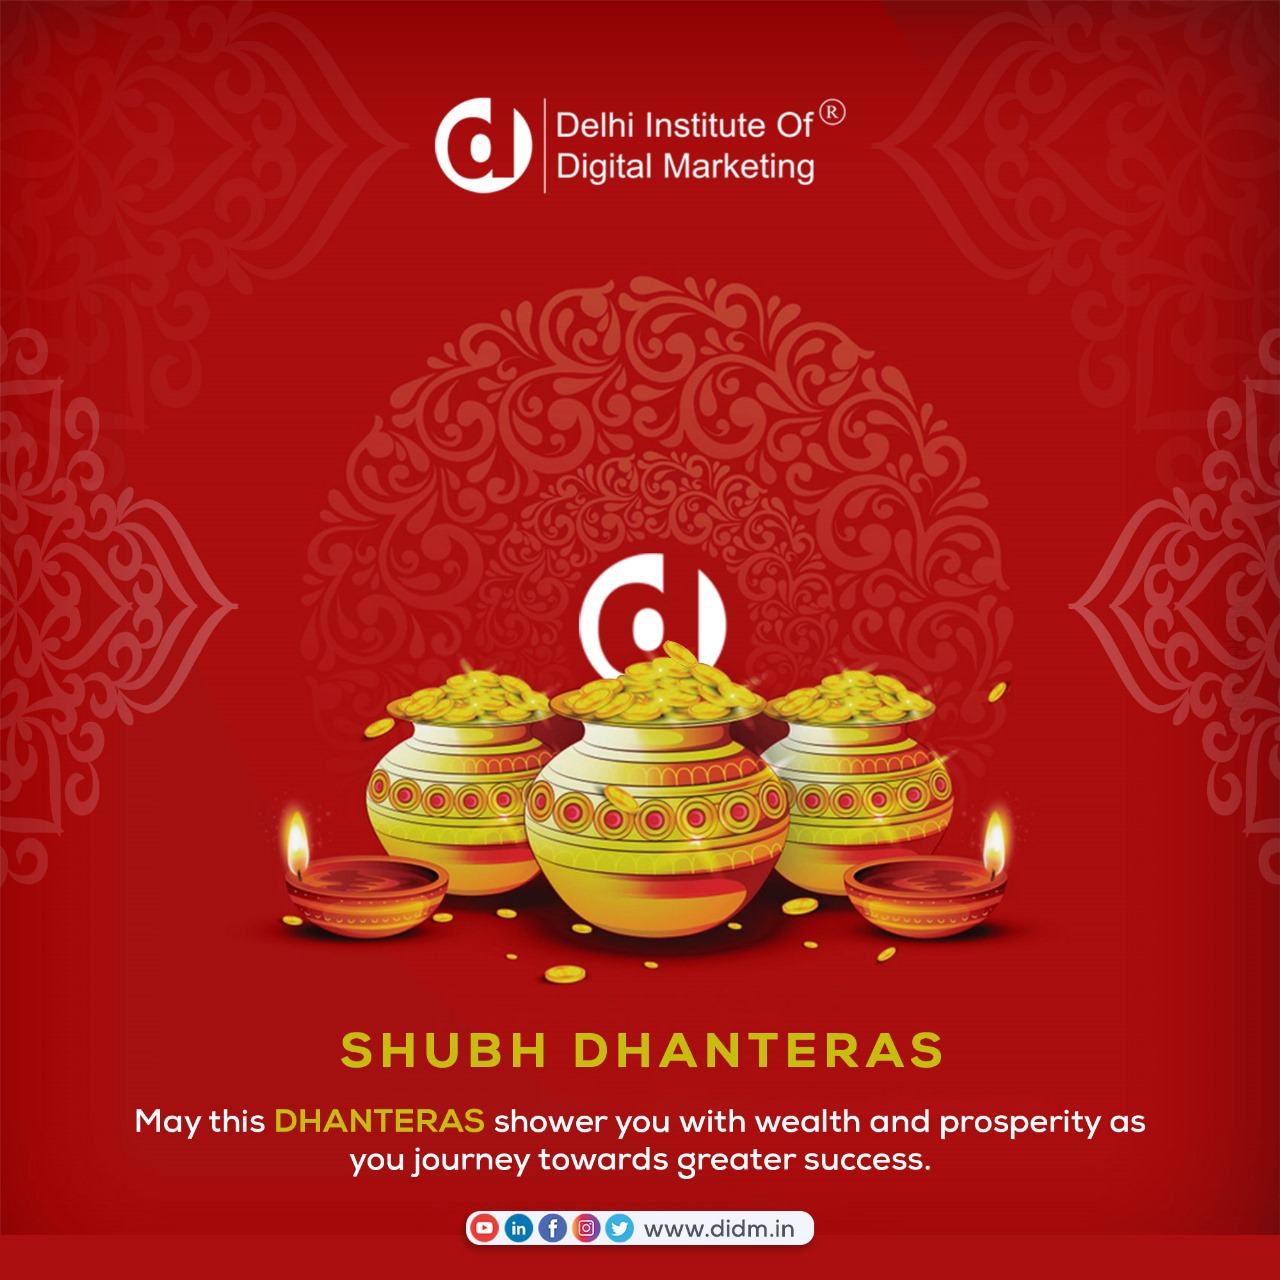 Shubh Dhanteras to you all from the DIDM Family